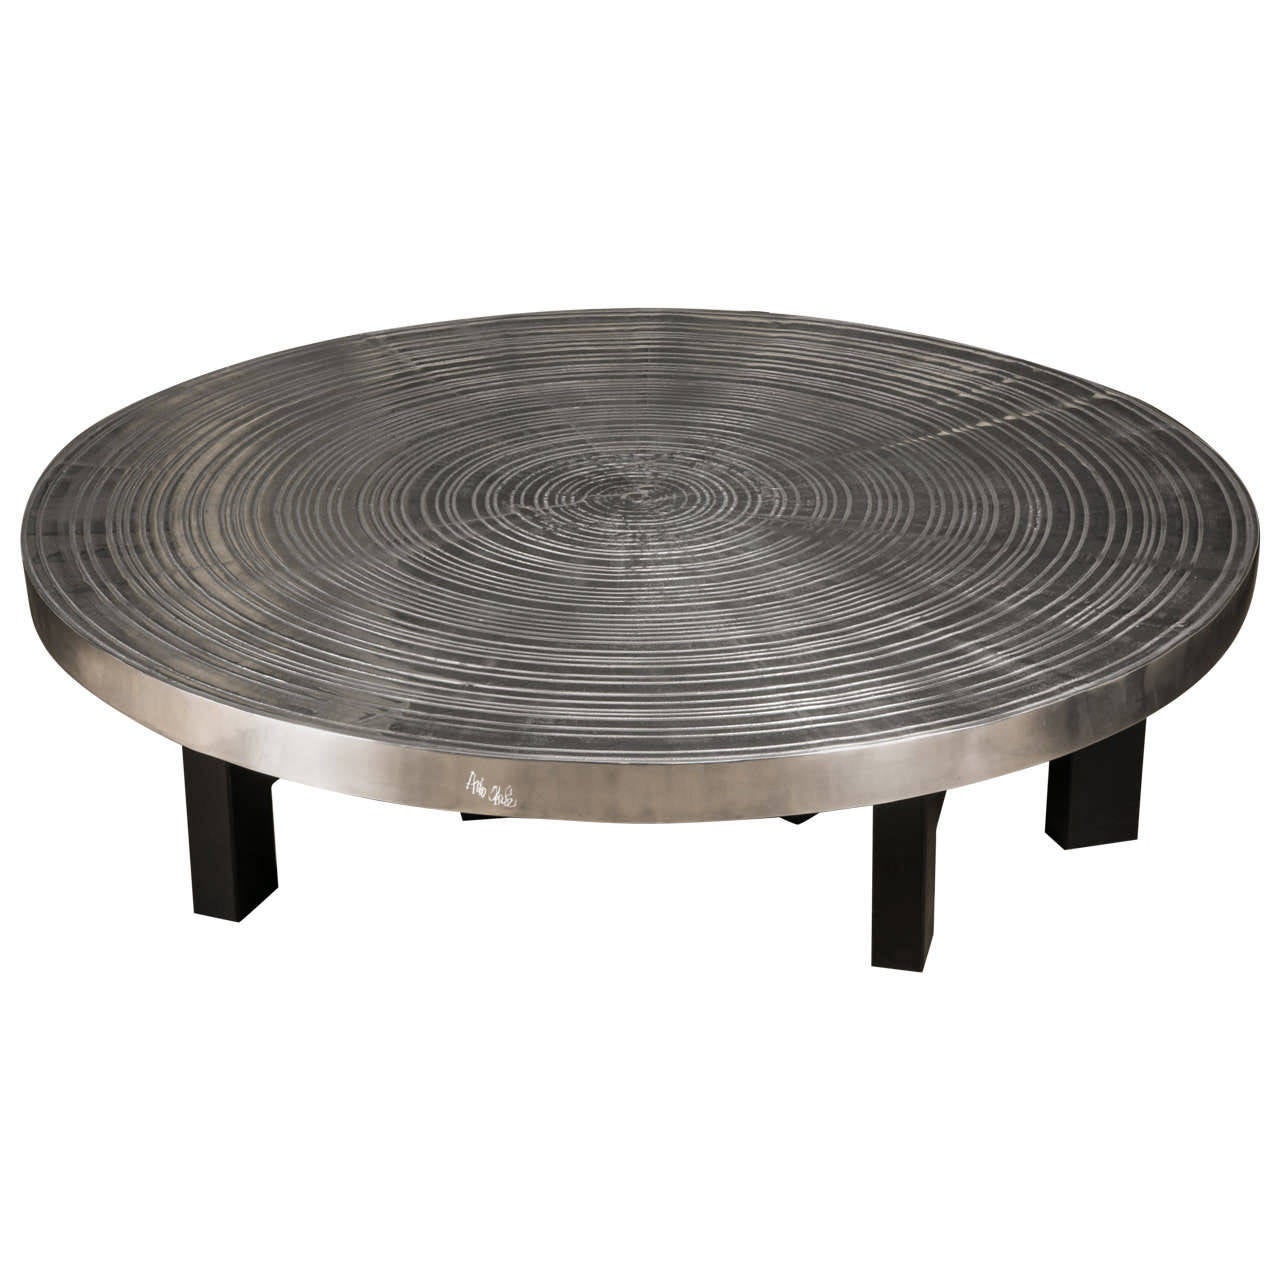 Signed Ado Chale Large Coffee Table 'Drop' in Cast Aluminium, circa 1980 For Sale